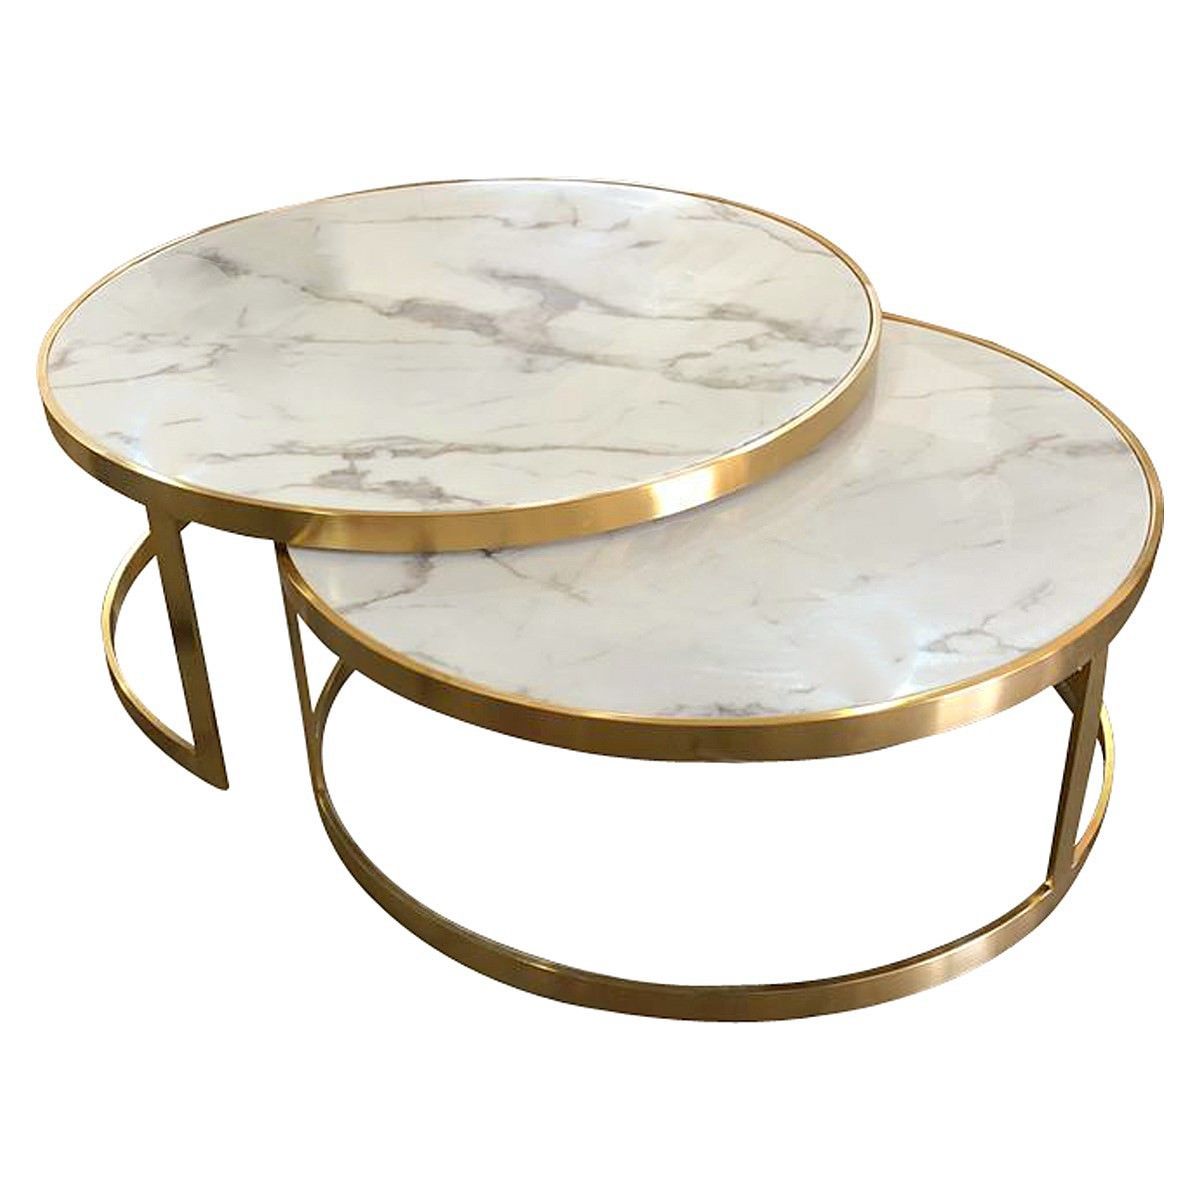 Mirabello 2 Piece Faux Marble Topped Metal Round Nesting Coffee Table Throughout Modern Round Faux Marble Coffee Tables (Gallery 13 of 20)